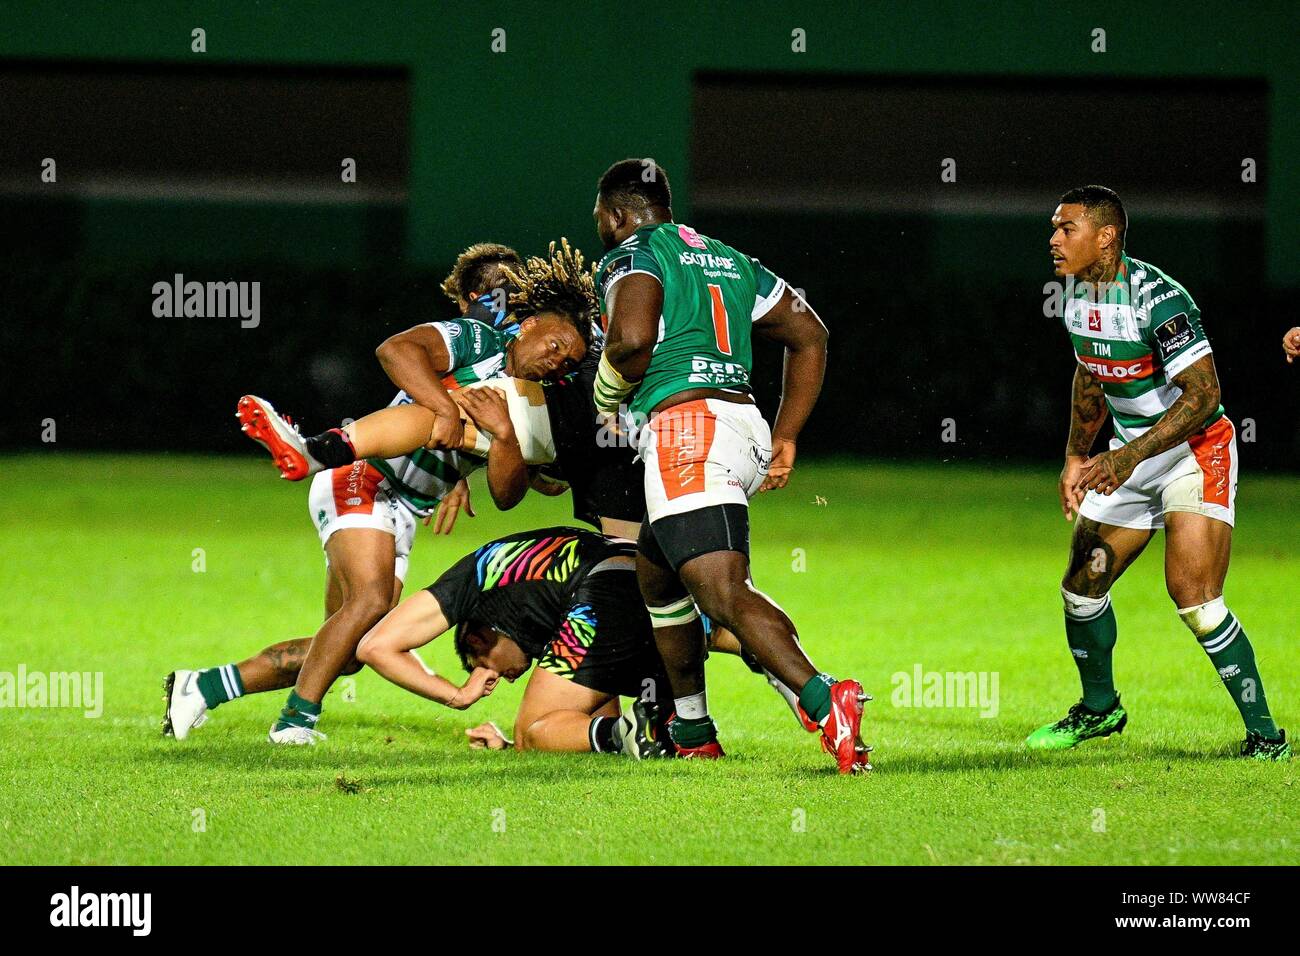 Treviso, Italy, 13 Sep 2019, TACKLE OF CHARLY TRUSSARDI (BENETTON) during  Test Match Pre Season - Benetton Treviso Vs Zebre Rugby - Rugby Guinness  Pro 14 - Credit: LPS/Ettore Griffoni/Alamy Live News Stock Photo - Alamy